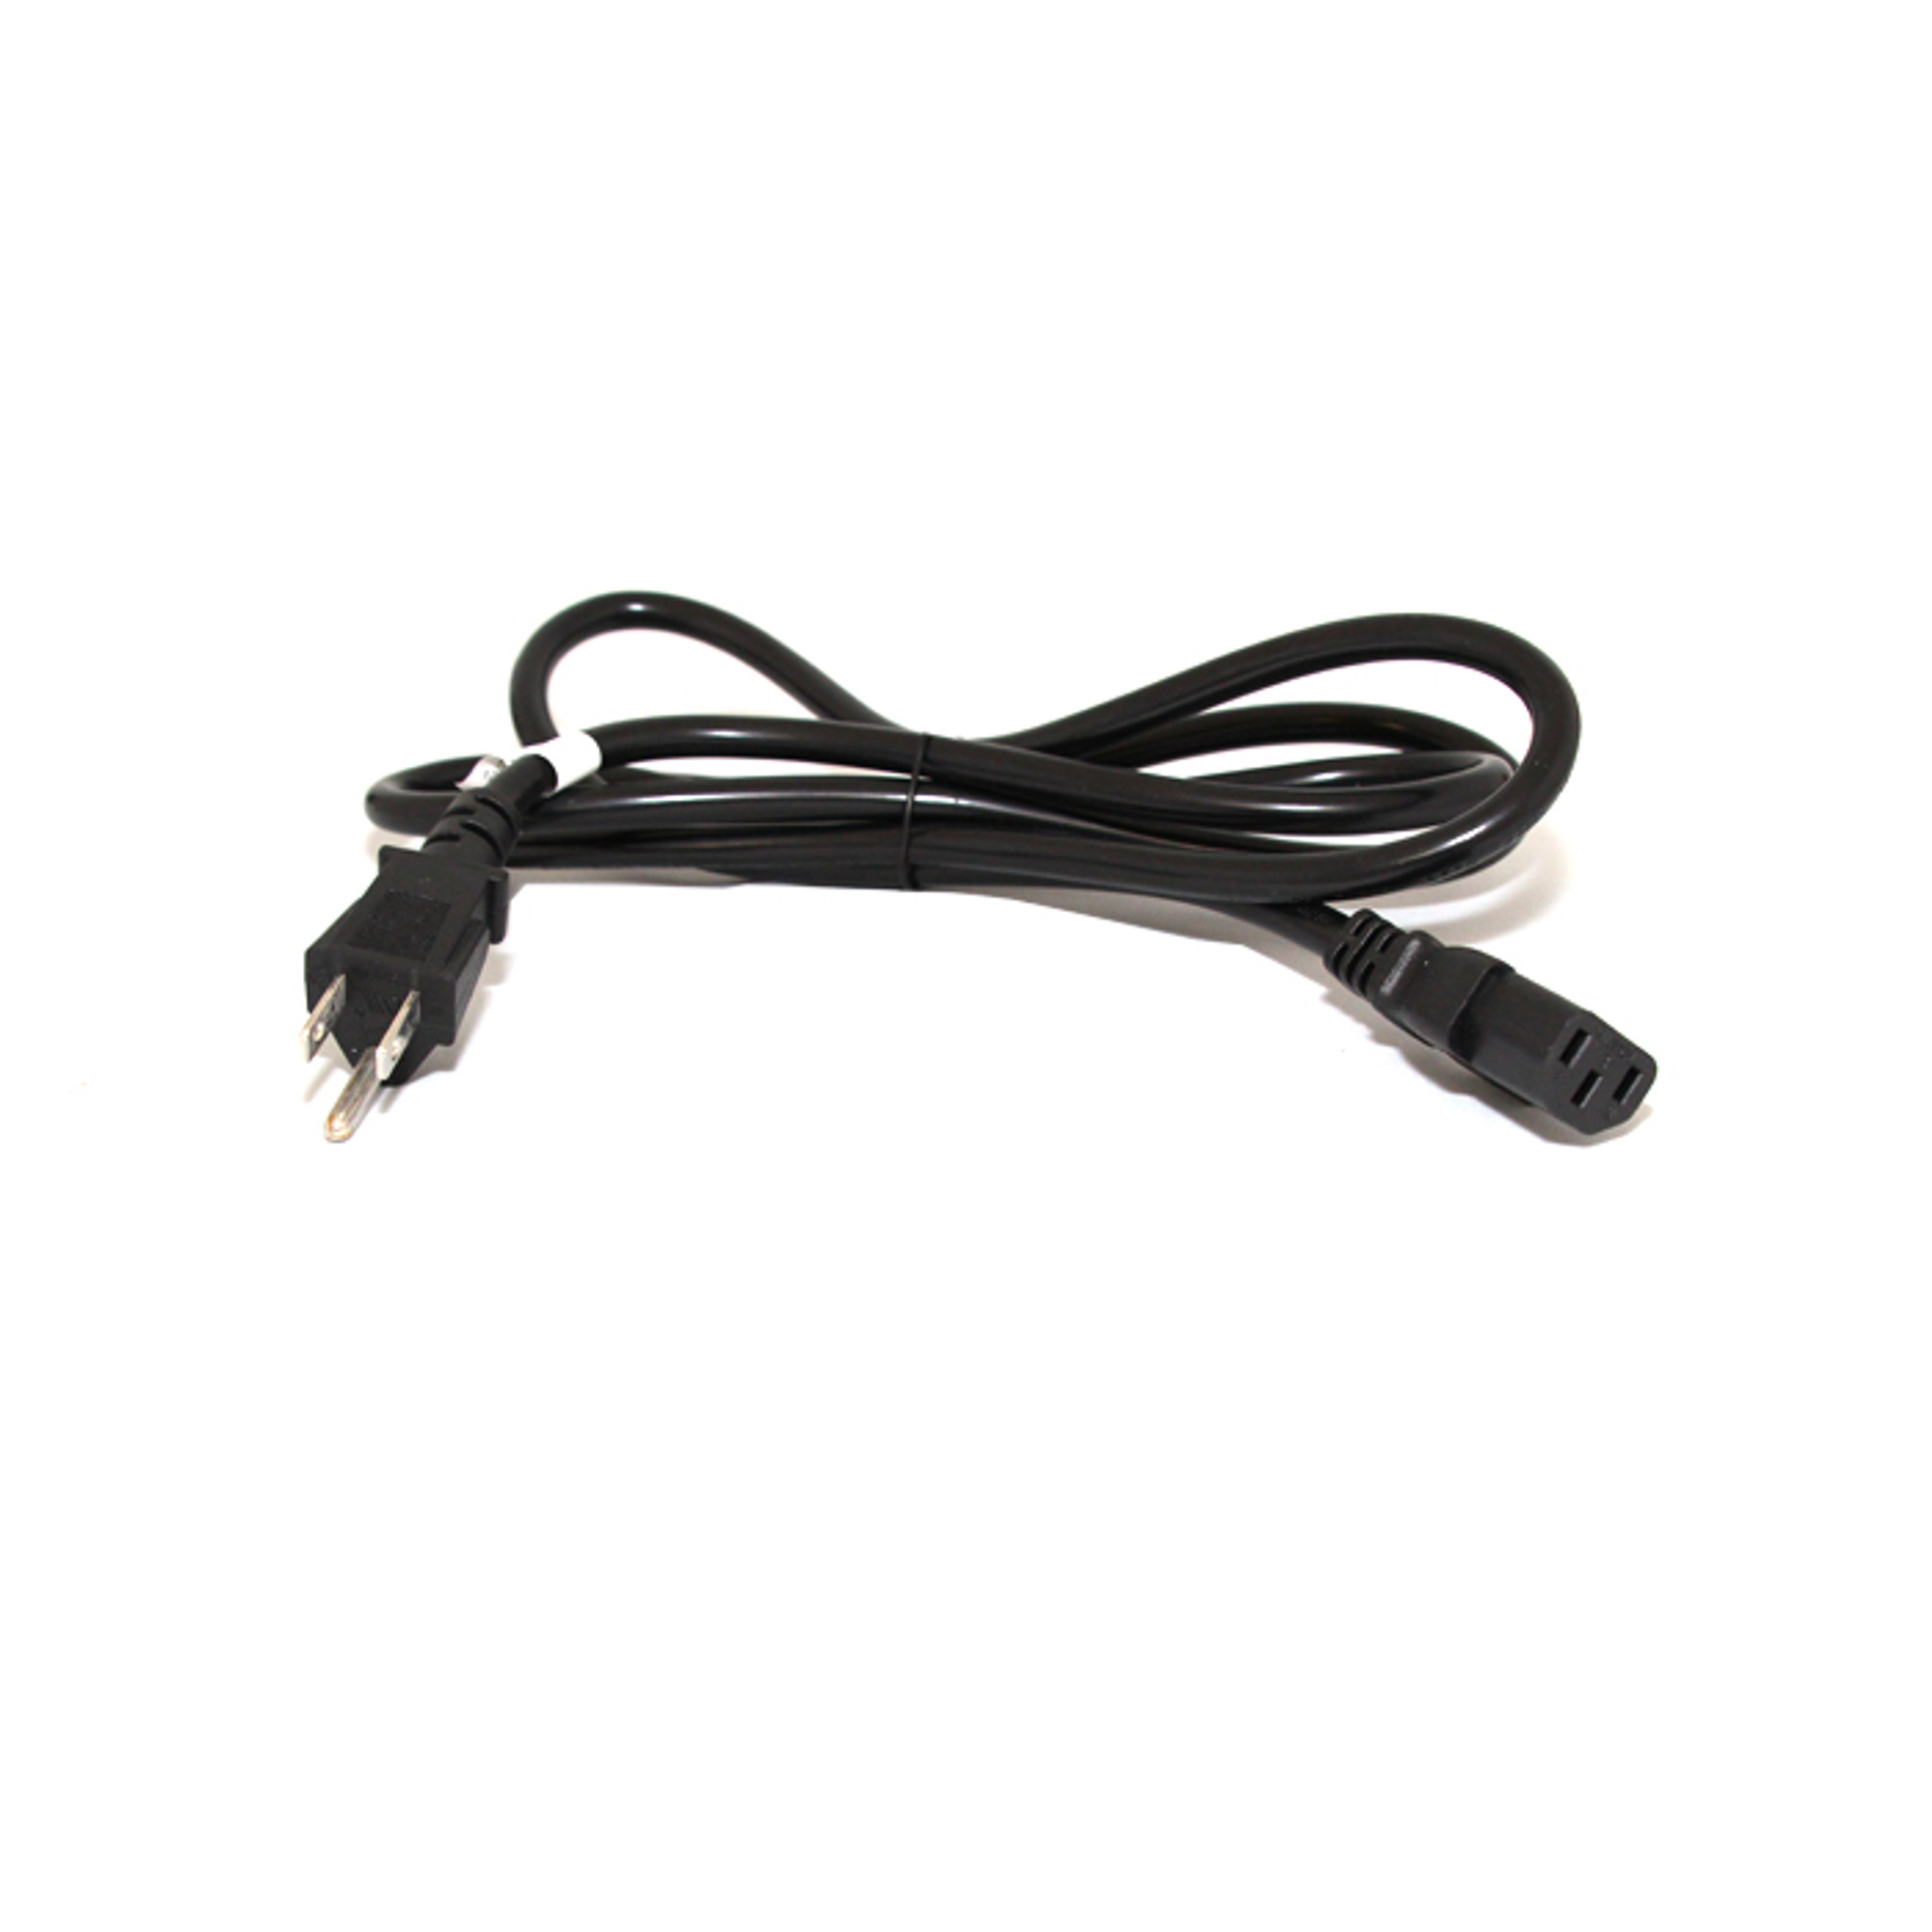 Buy Beam Central Vacuum Power Cord - Beam and Eureka Cord 100346 from  Canada at